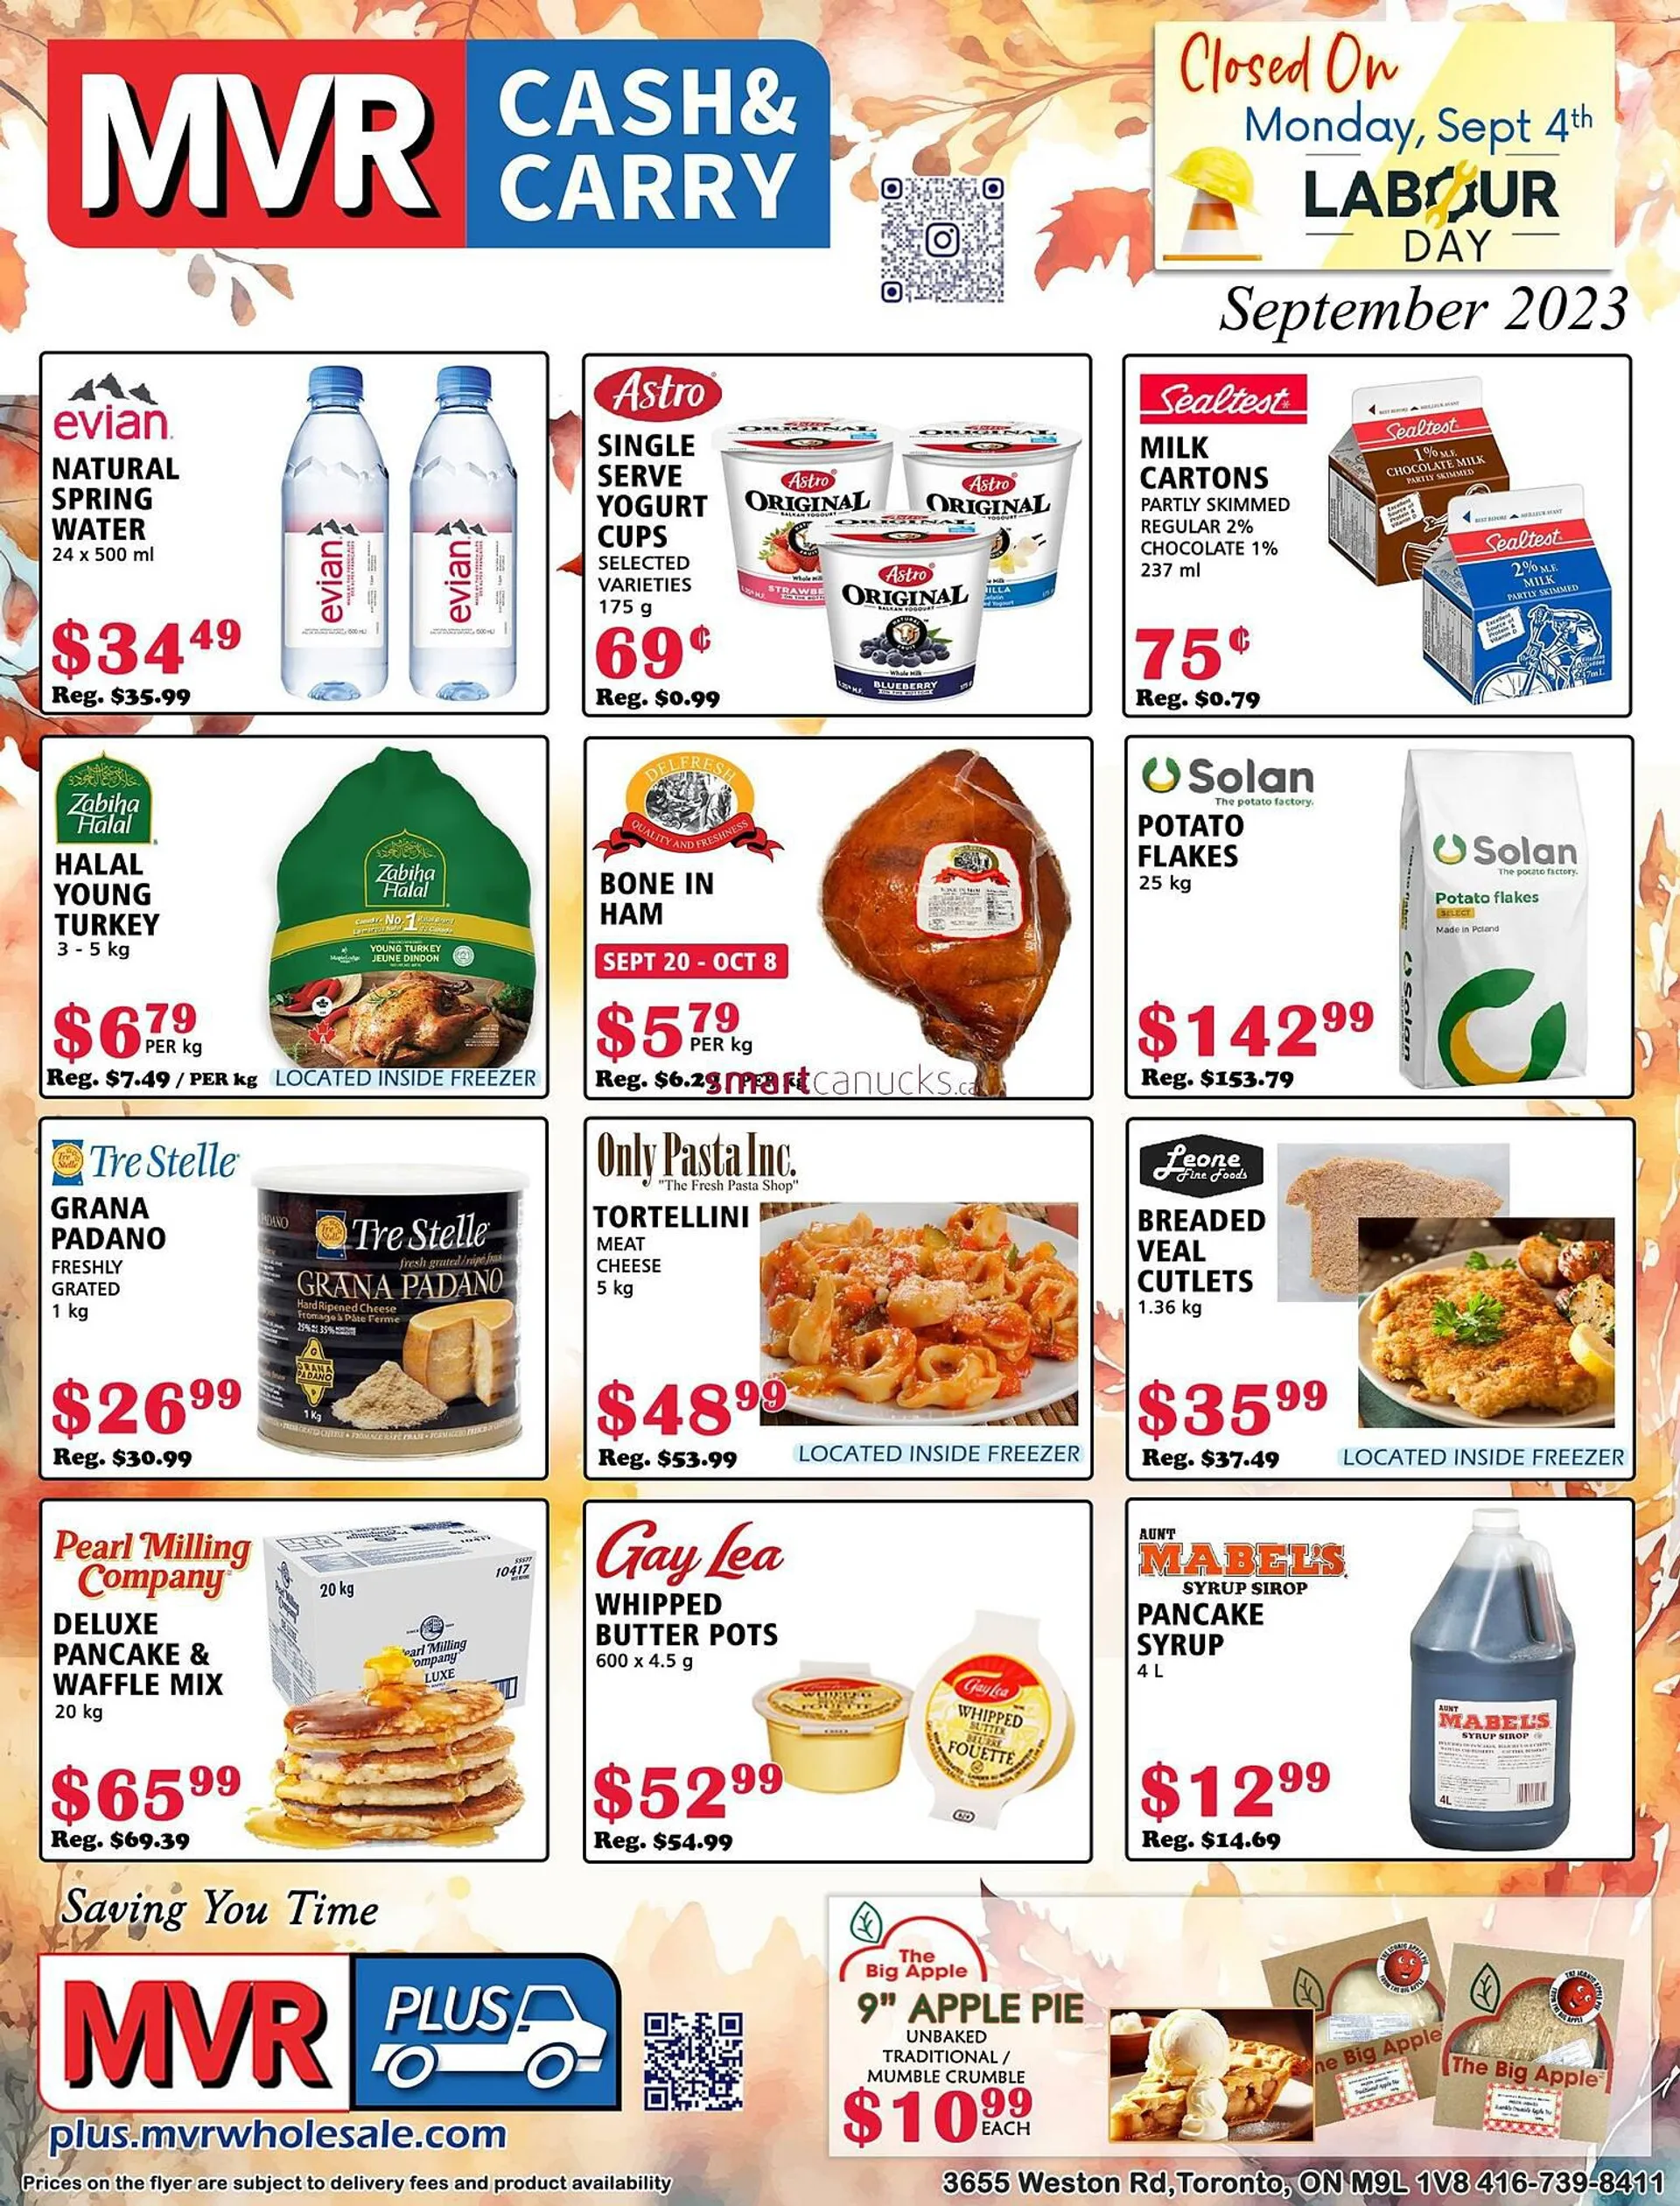 MVR Cash & Carry flyer